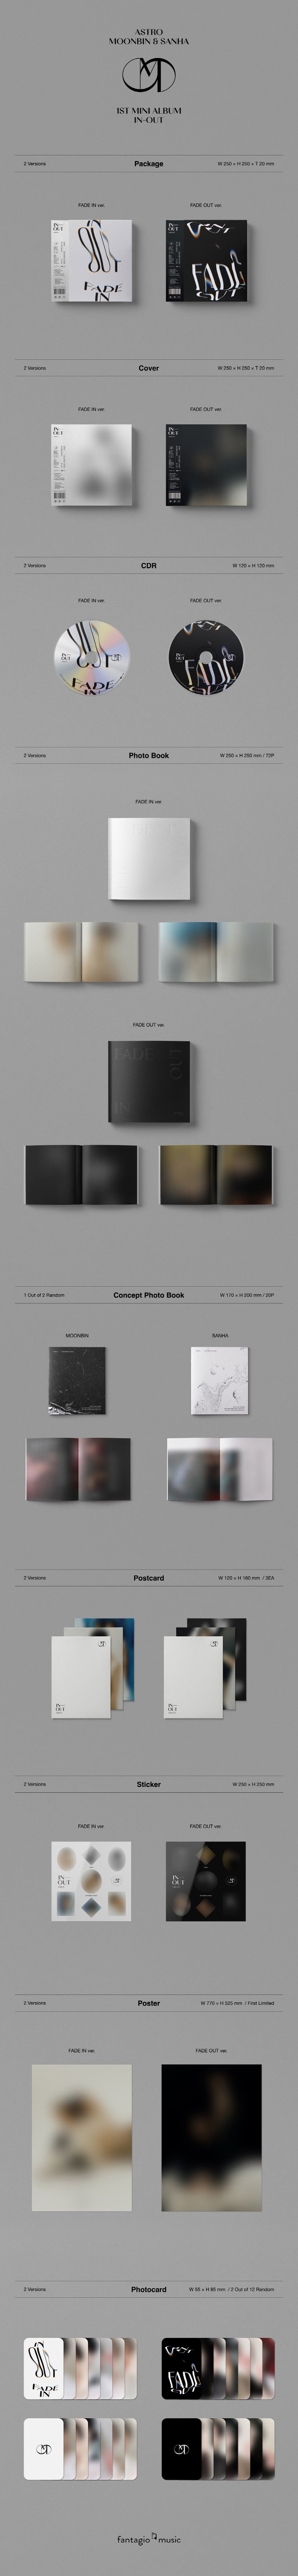 1 CD
1 Photo Book (72 pages)
1 Concept Photo Book (20 pages)
3 Postcards
1 Sticker